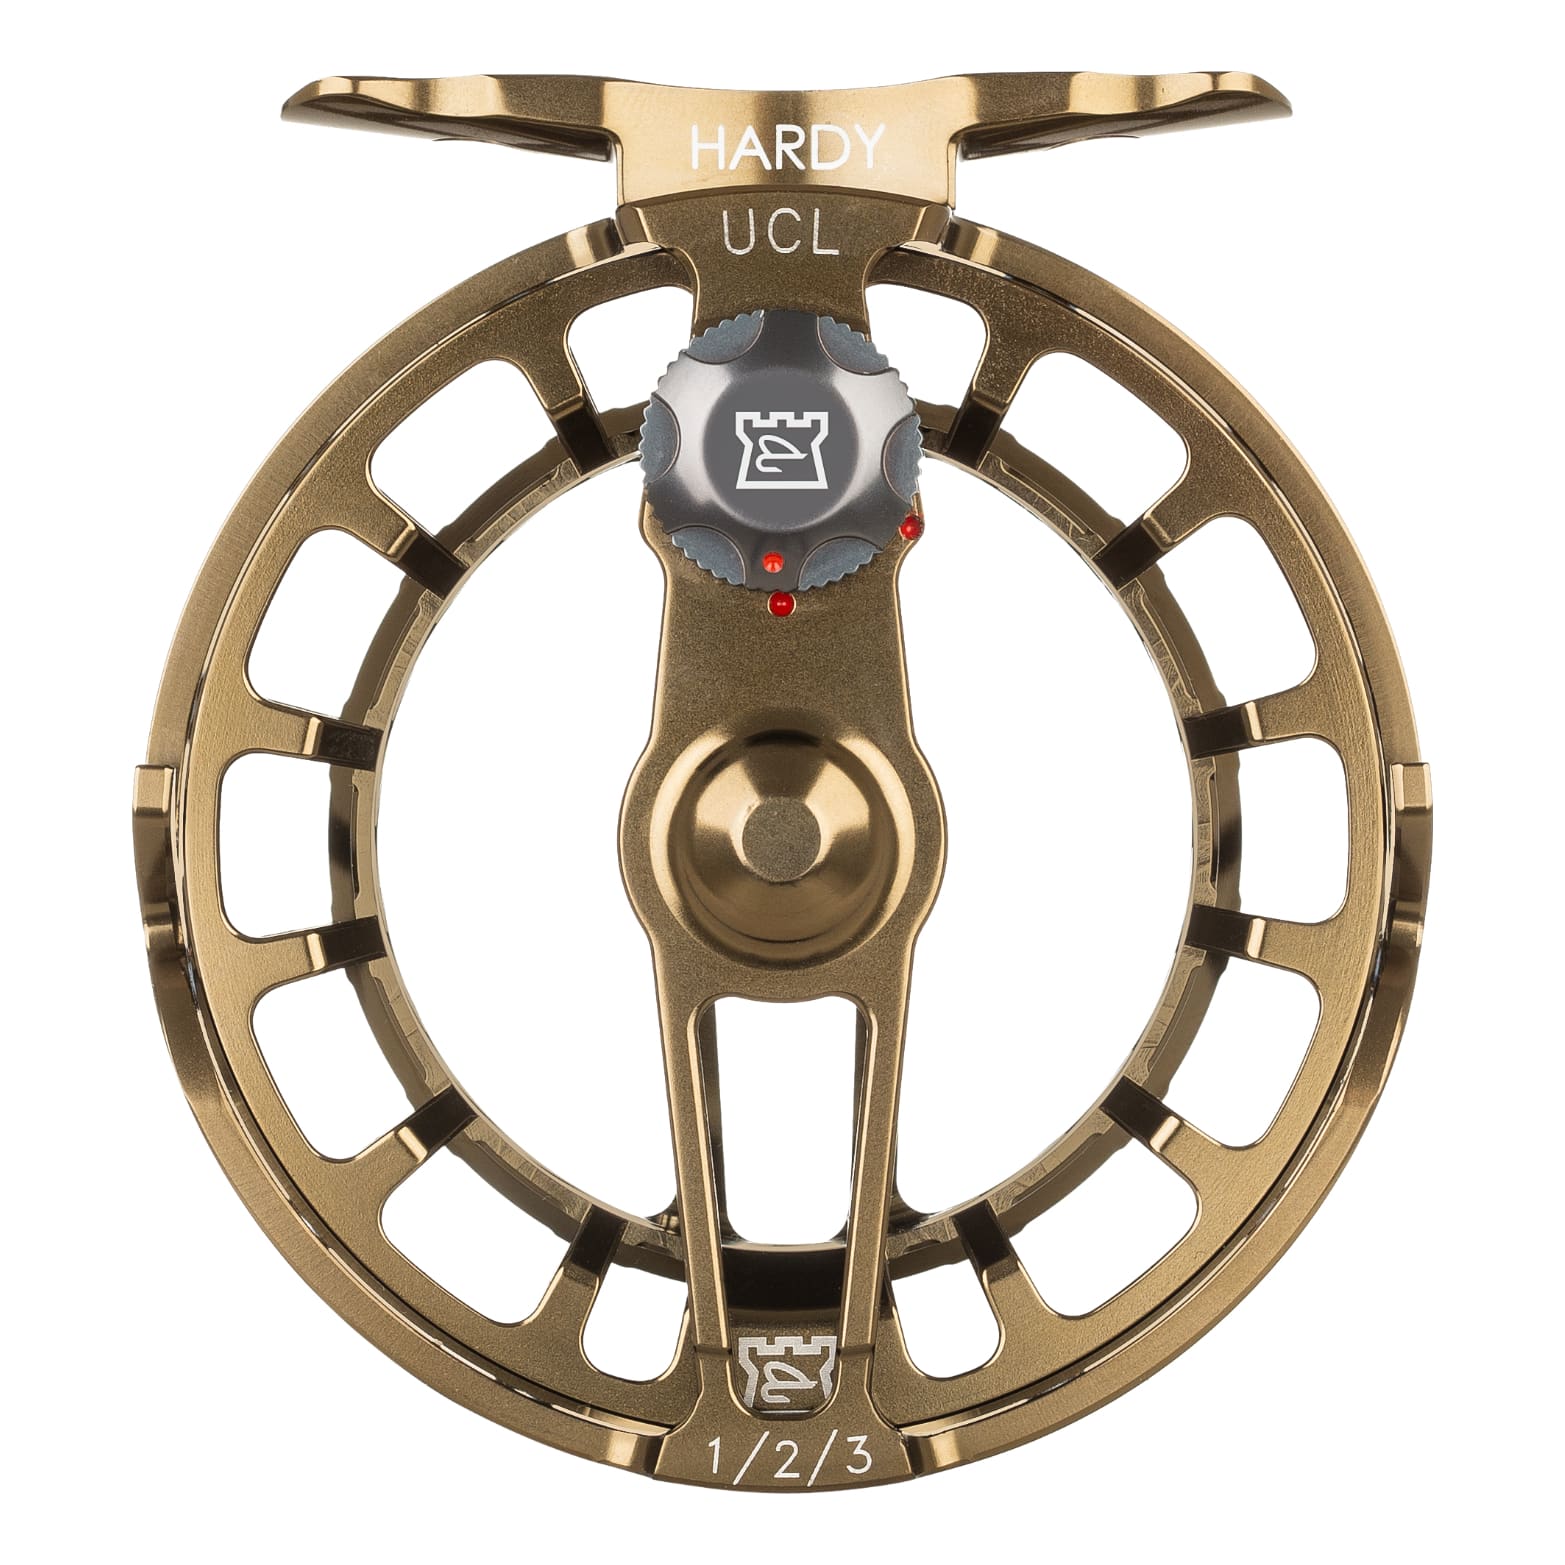 White River Dogwood Canyon DC56 Fly Fishing Reel Display for sale online